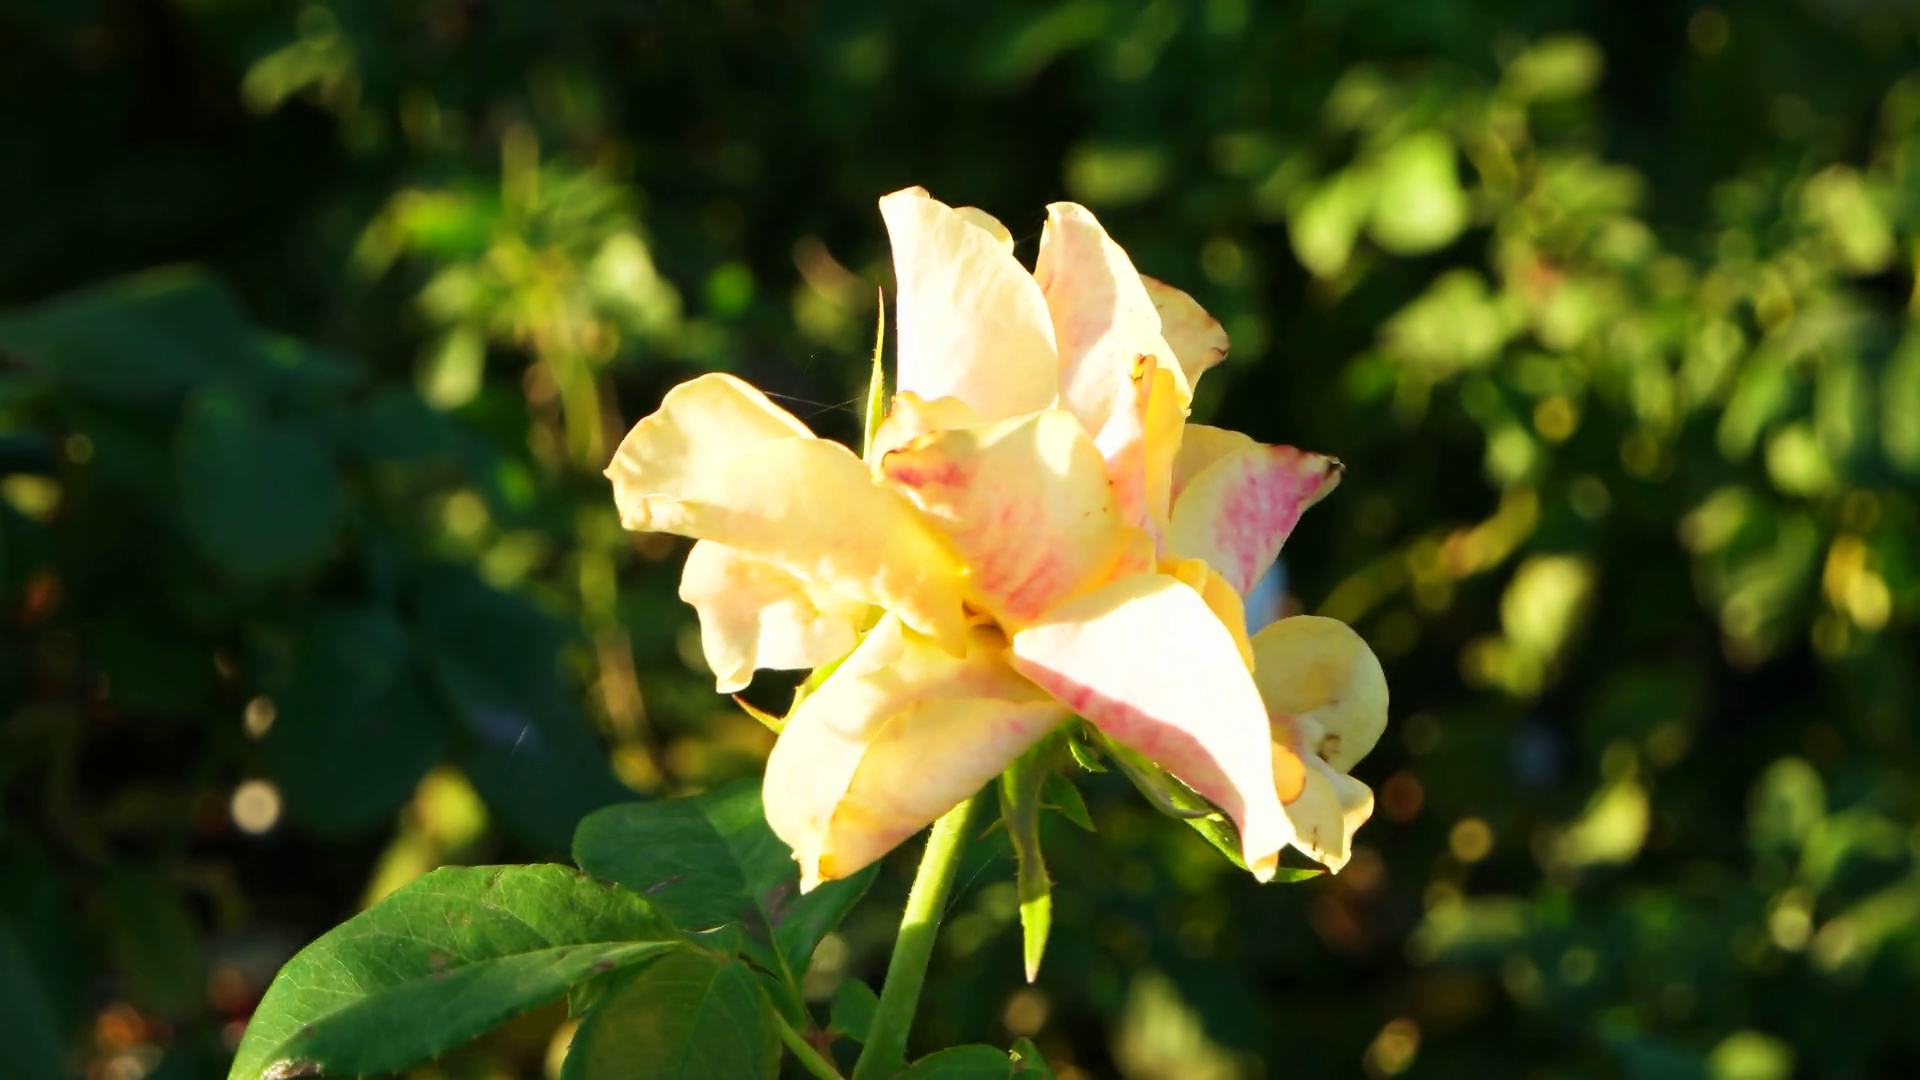 Yellow roses in rosegarden in autumn time set of footages backlit ...